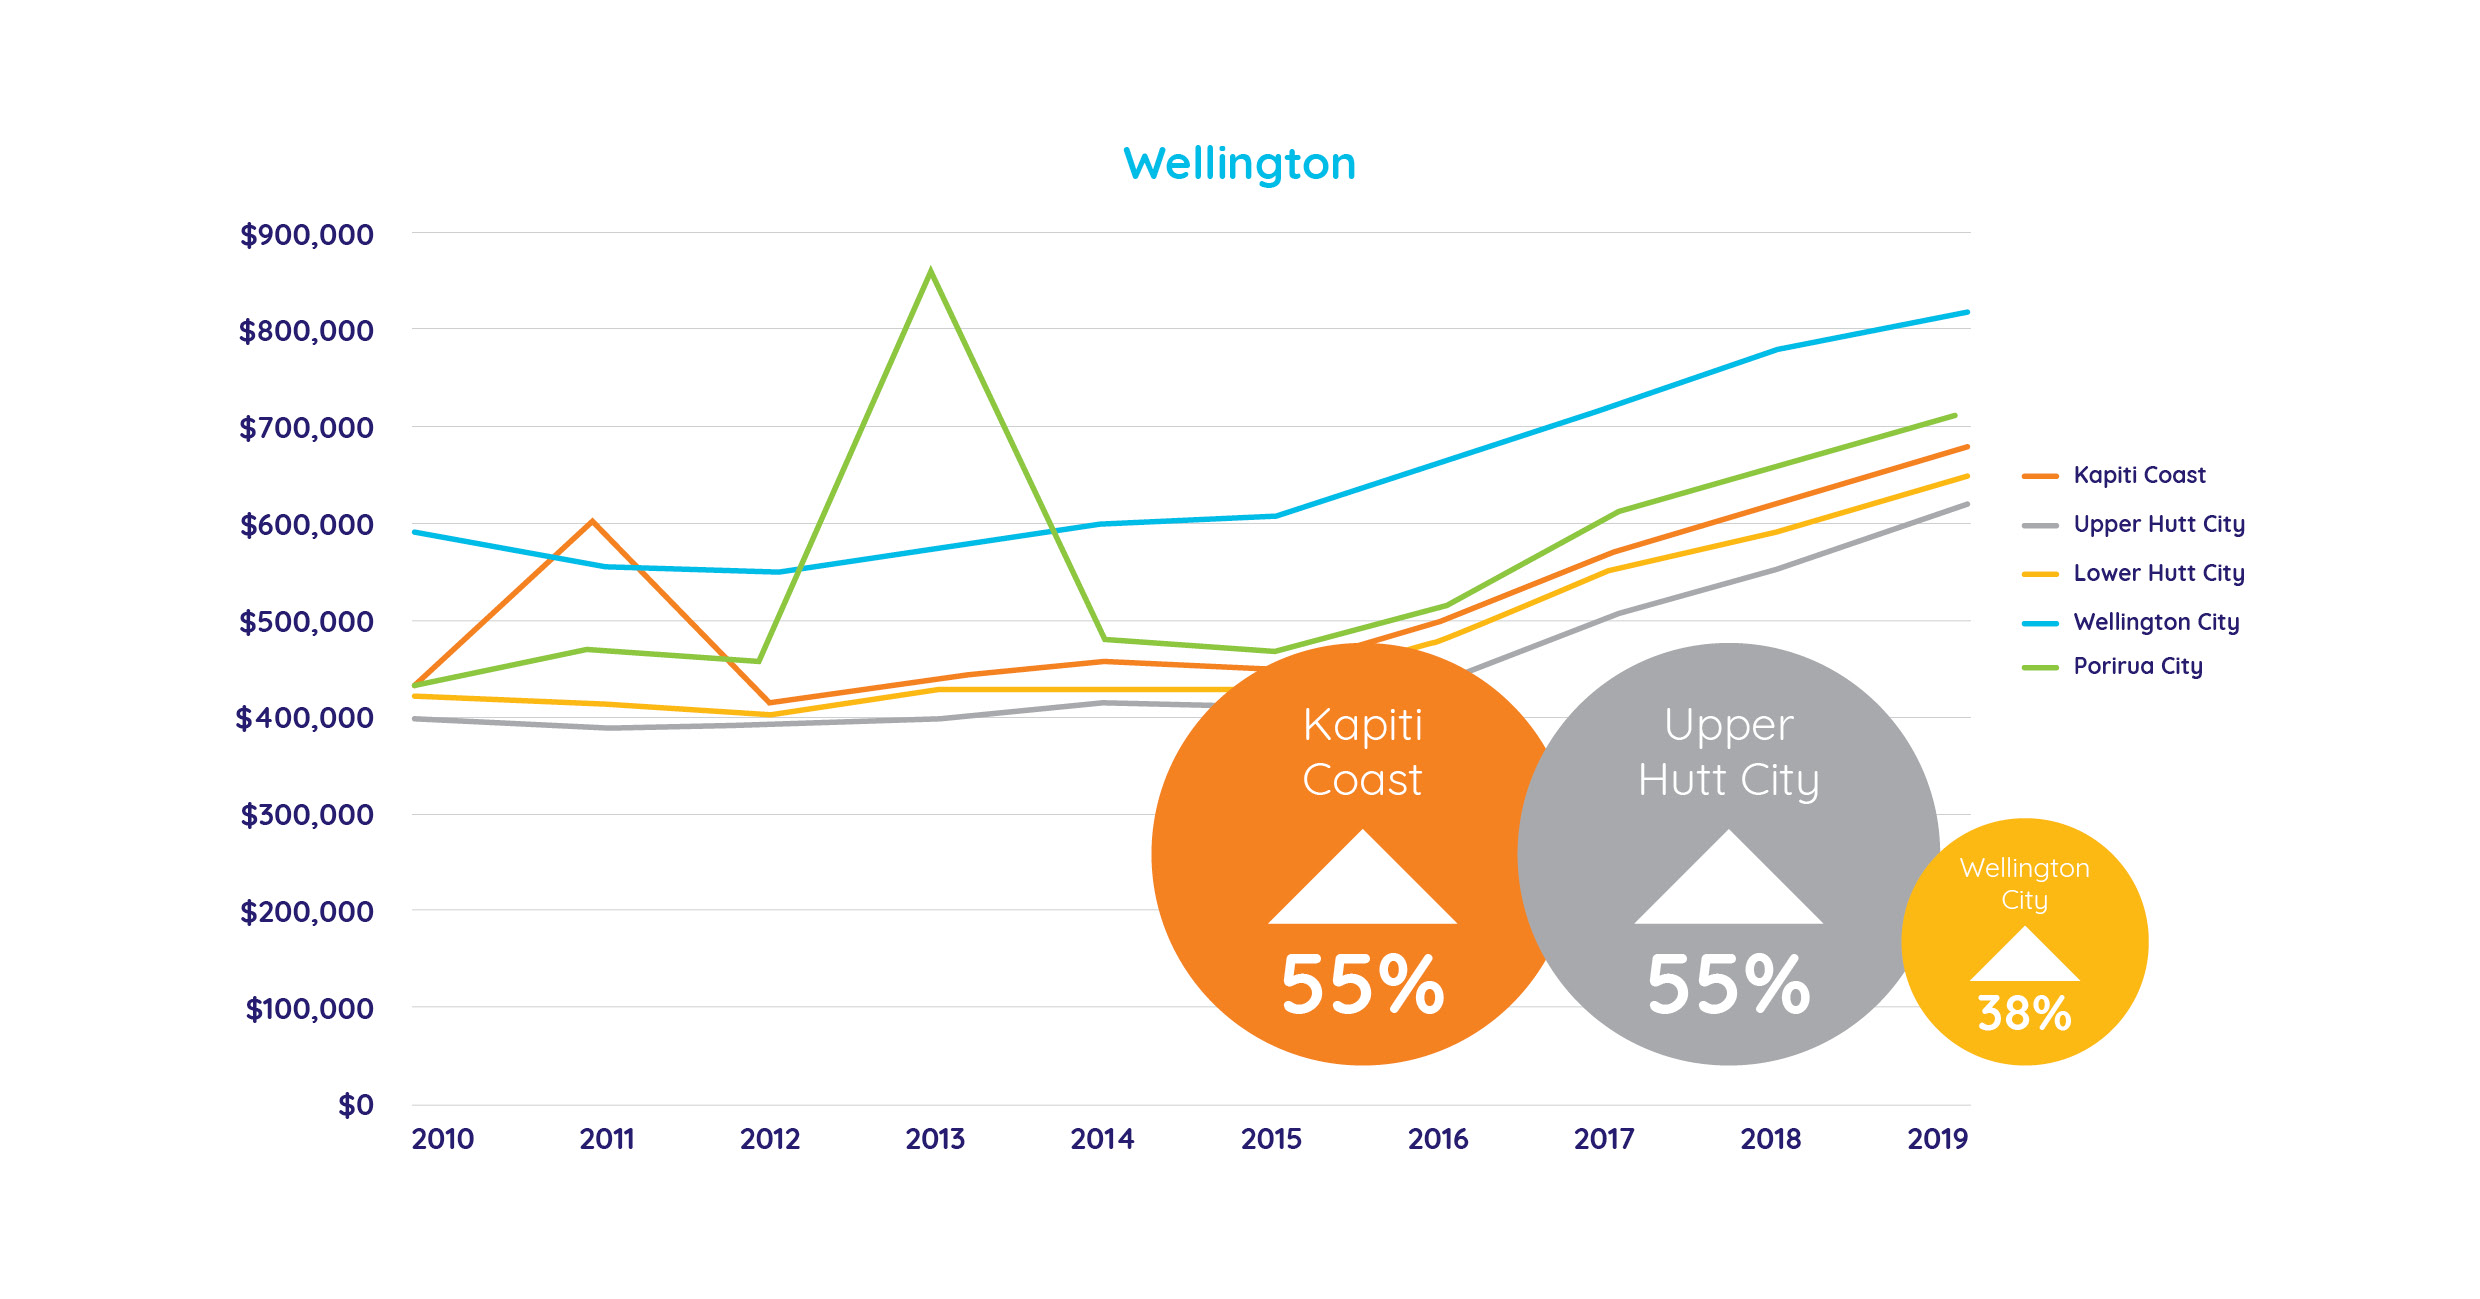 Average asking prices in Wellington over the last 10 years